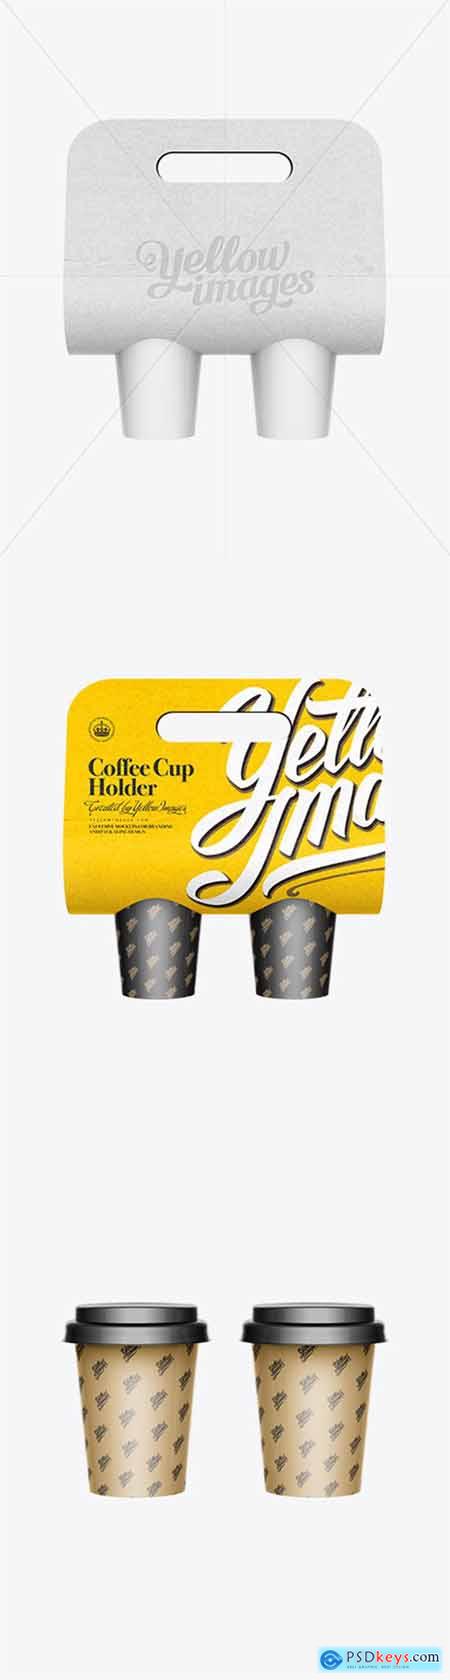 Paper Coffee Cup Carrier Mockup 11597